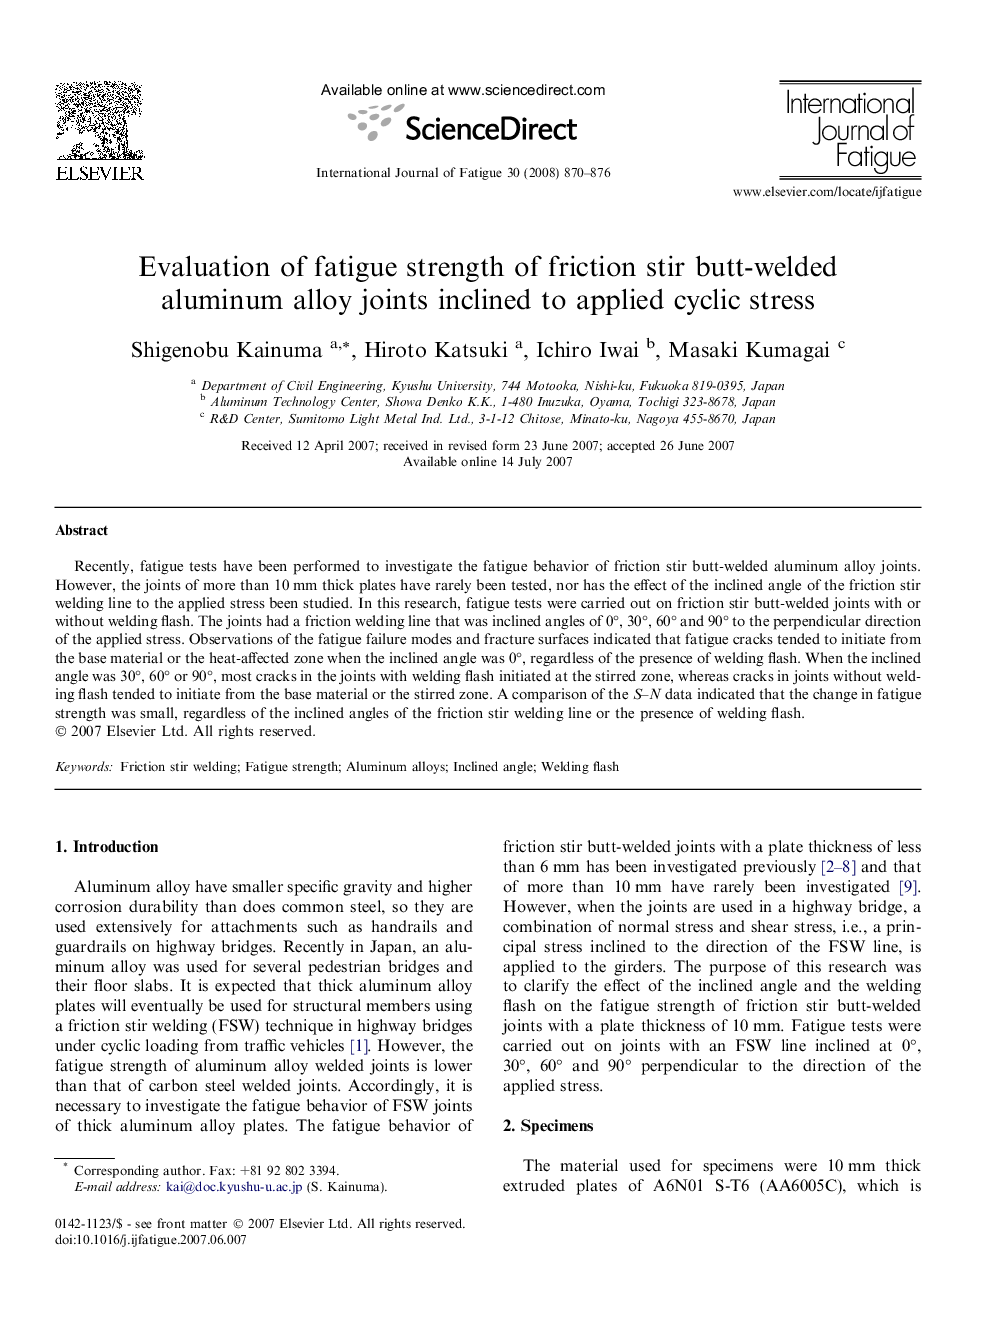 Evaluation of fatigue strength of friction stir butt-welded aluminum alloy joints inclined to applied cyclic stress